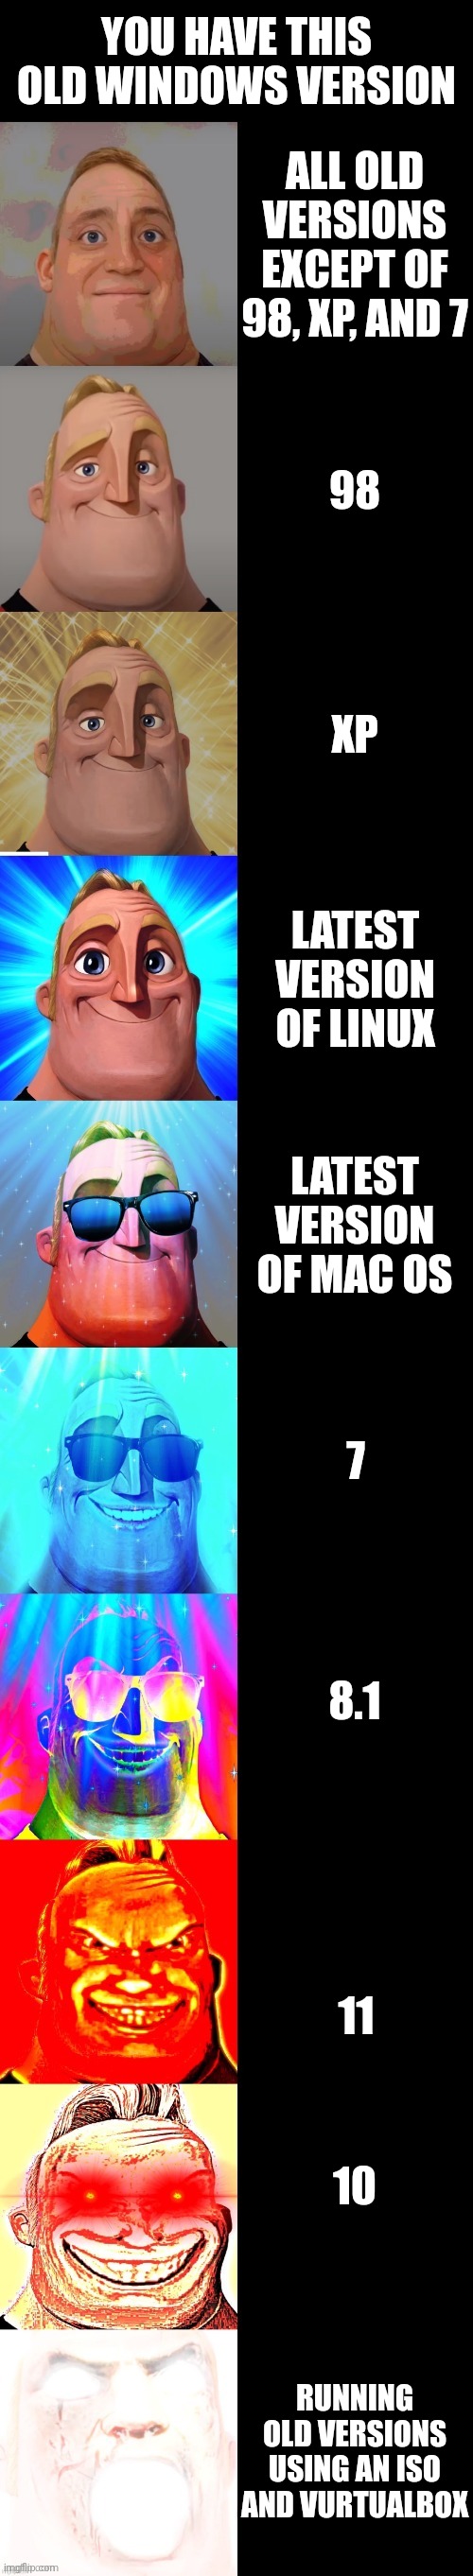 mr incredible becoming canny | YOU HAVE THIS OLD WINDOWS VERSION; ALL OLD VERSIONS EXCEPT OF 98, XP, AND 7; 98; XP; LATEST VERSION OF LINUX; LATEST VERSION OF MAC OS; 7; 8.1; 11; 10; RUNNING OLD VERSIONS USING AN ISO AND VURTUALBOX | image tagged in mr incredible becoming canny | made w/ Imgflip meme maker